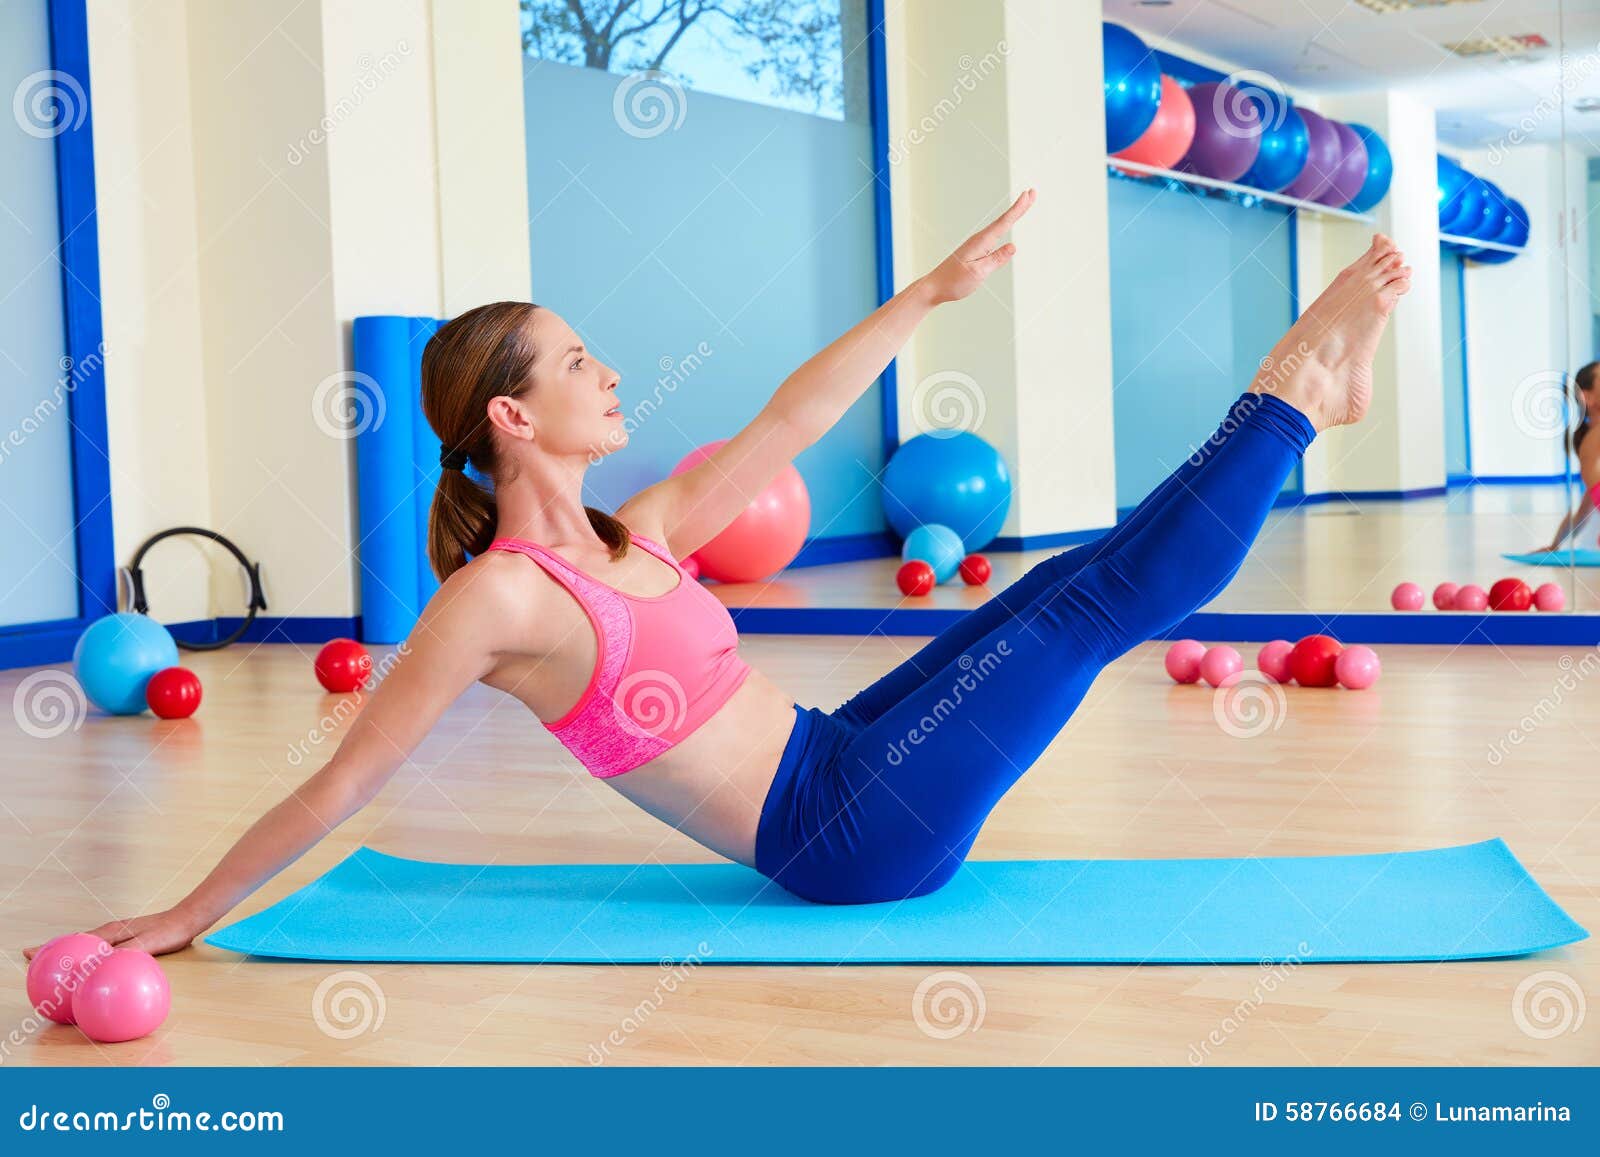 pilates woman teaser exercise workout at gym